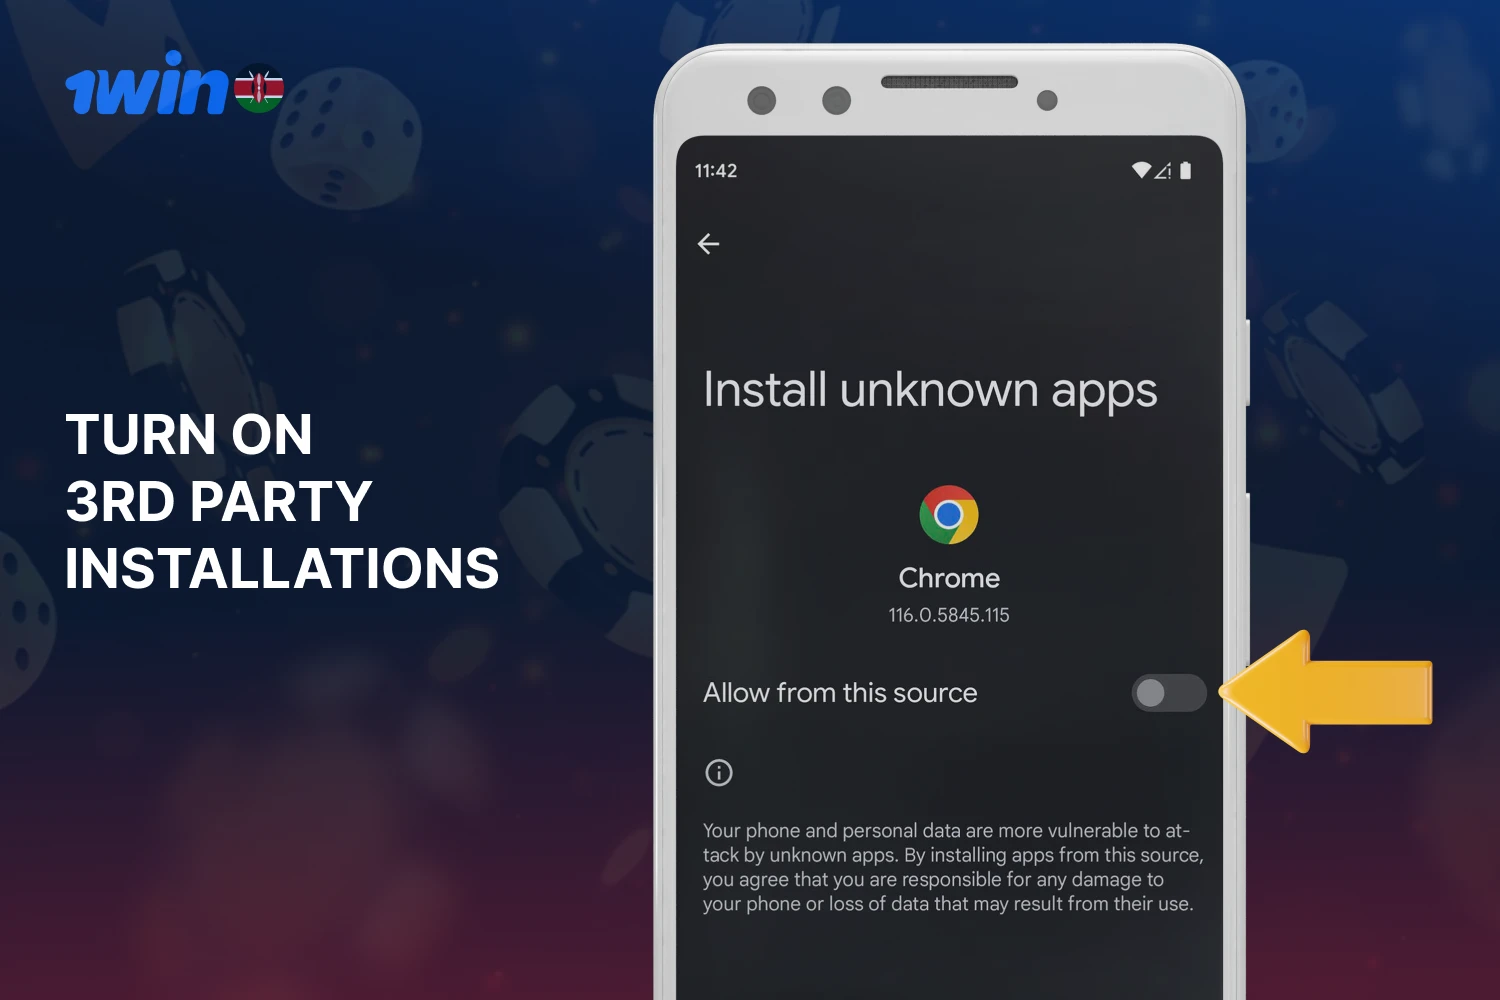 To install 1win apk, allow installation of files from unknown sources on your smartphone.